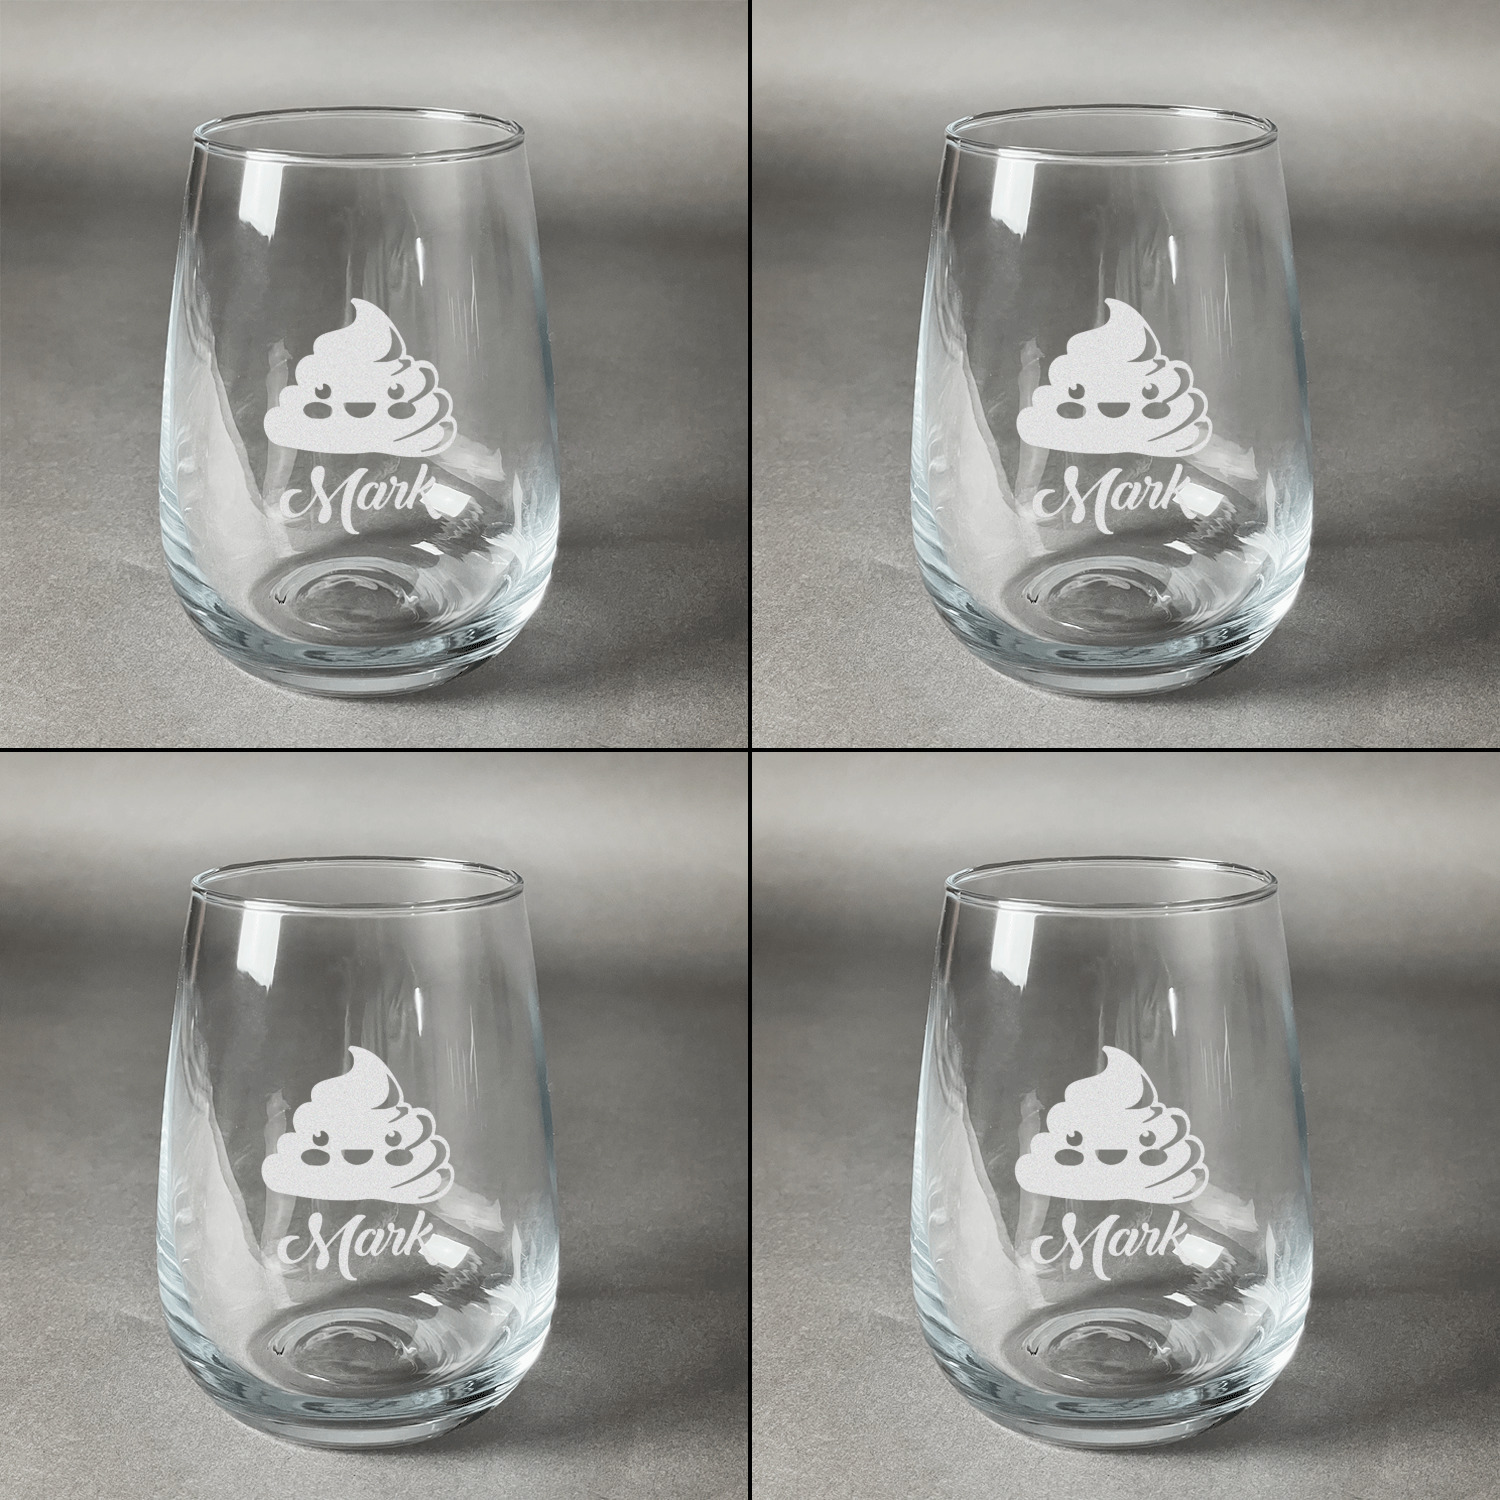 https://www.youcustomizeit.com/common/MAKE/1210994/Poop-Emoji-Set-of-Four-Personalized-Stemless-Wineglasses-Approval.jpg?lm=1682543771